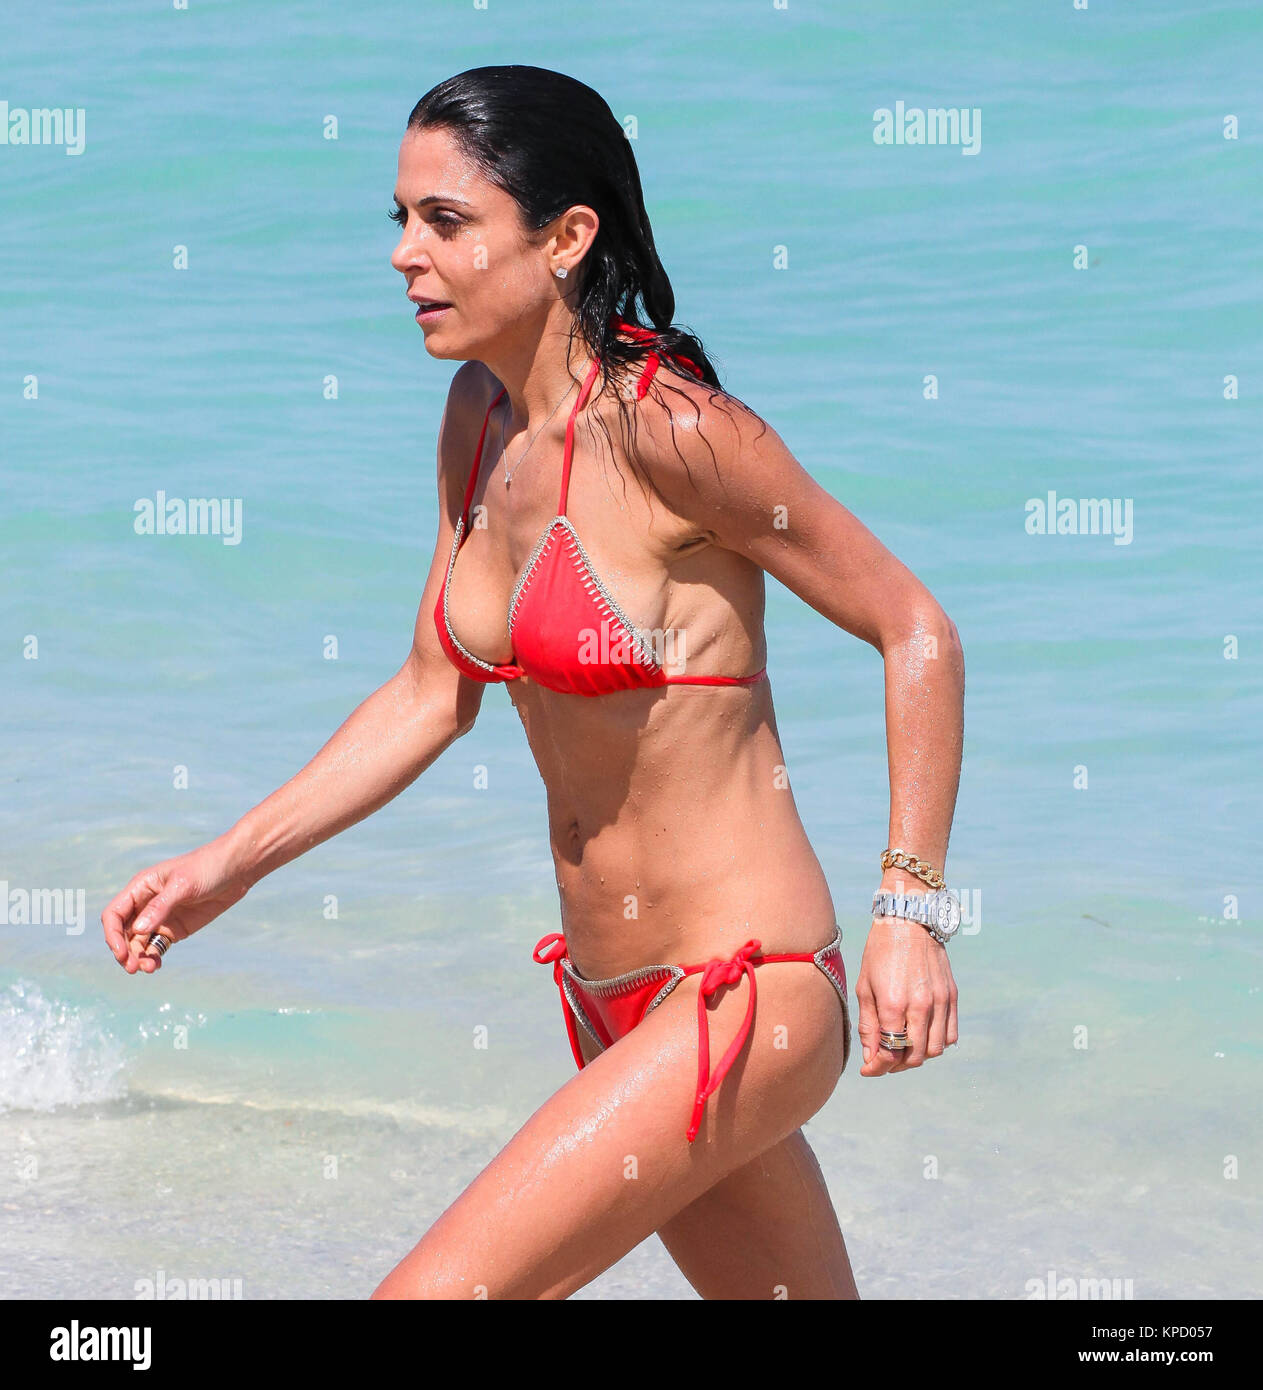 MIAMI BEACH, FL - MARCH 31: The Real Housewives of New York star Bethenny  Frankel look skinny